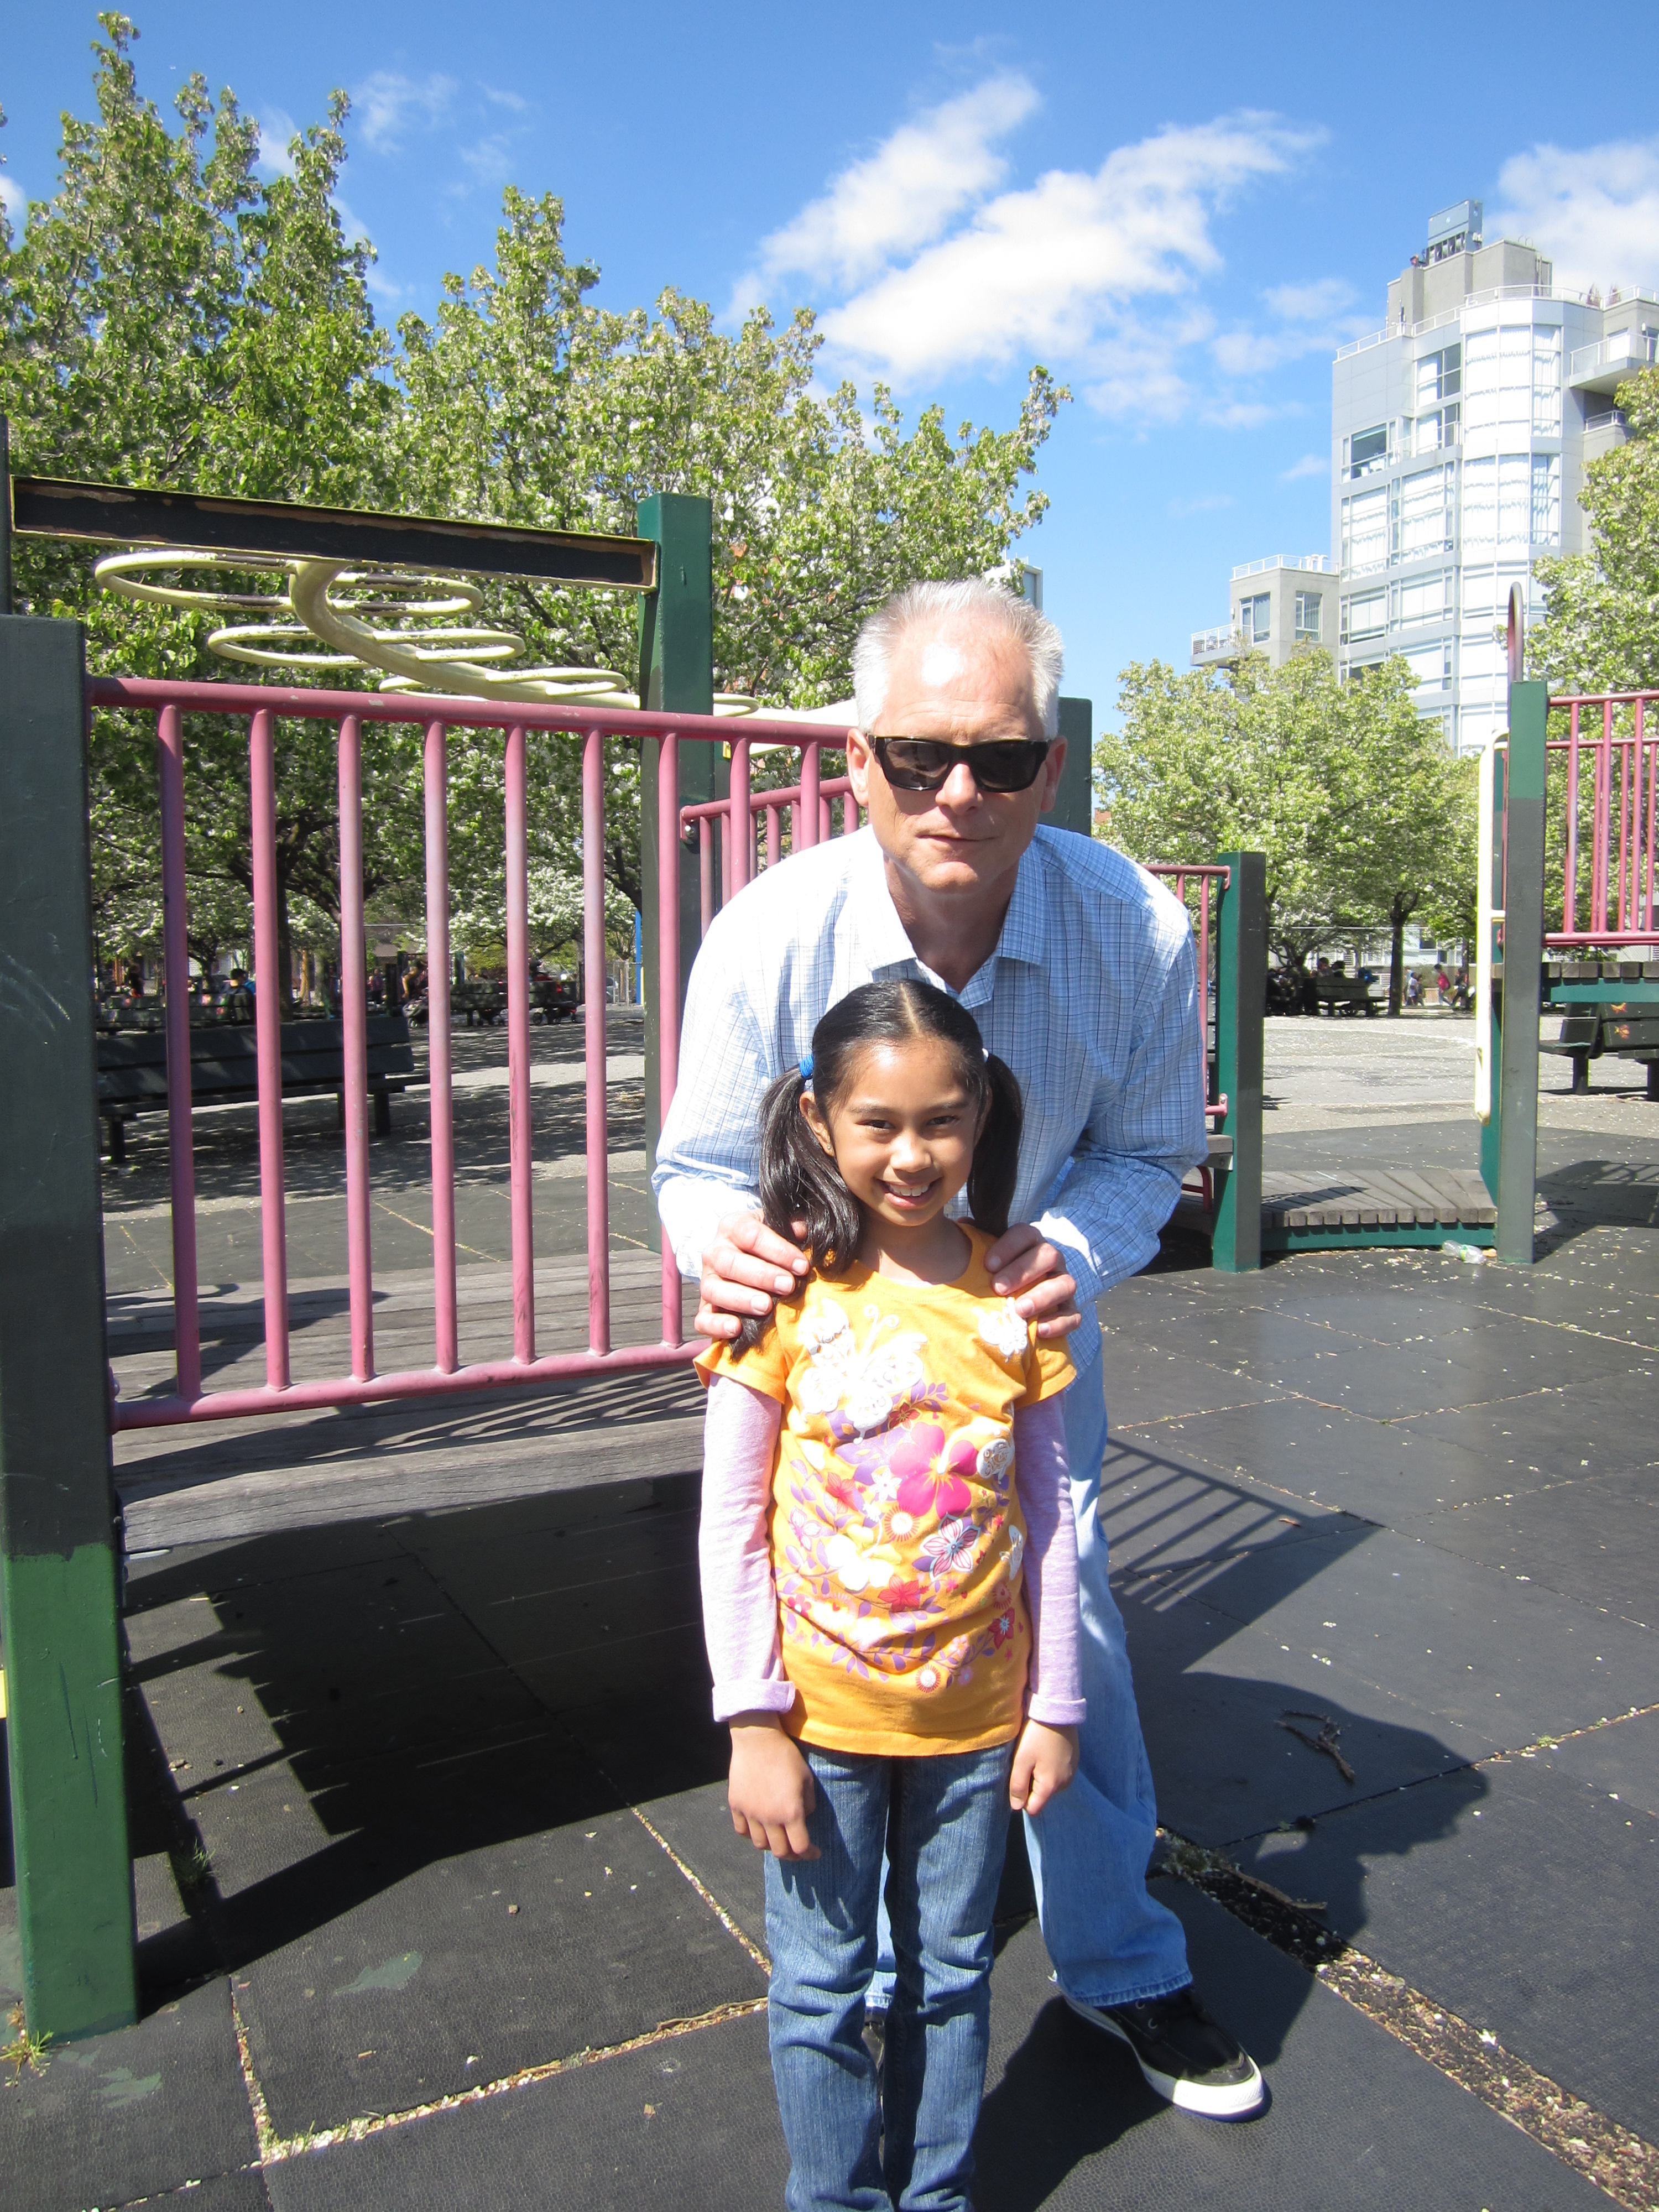 On set of Snapple commercial with Kenny Mayne, May 2013